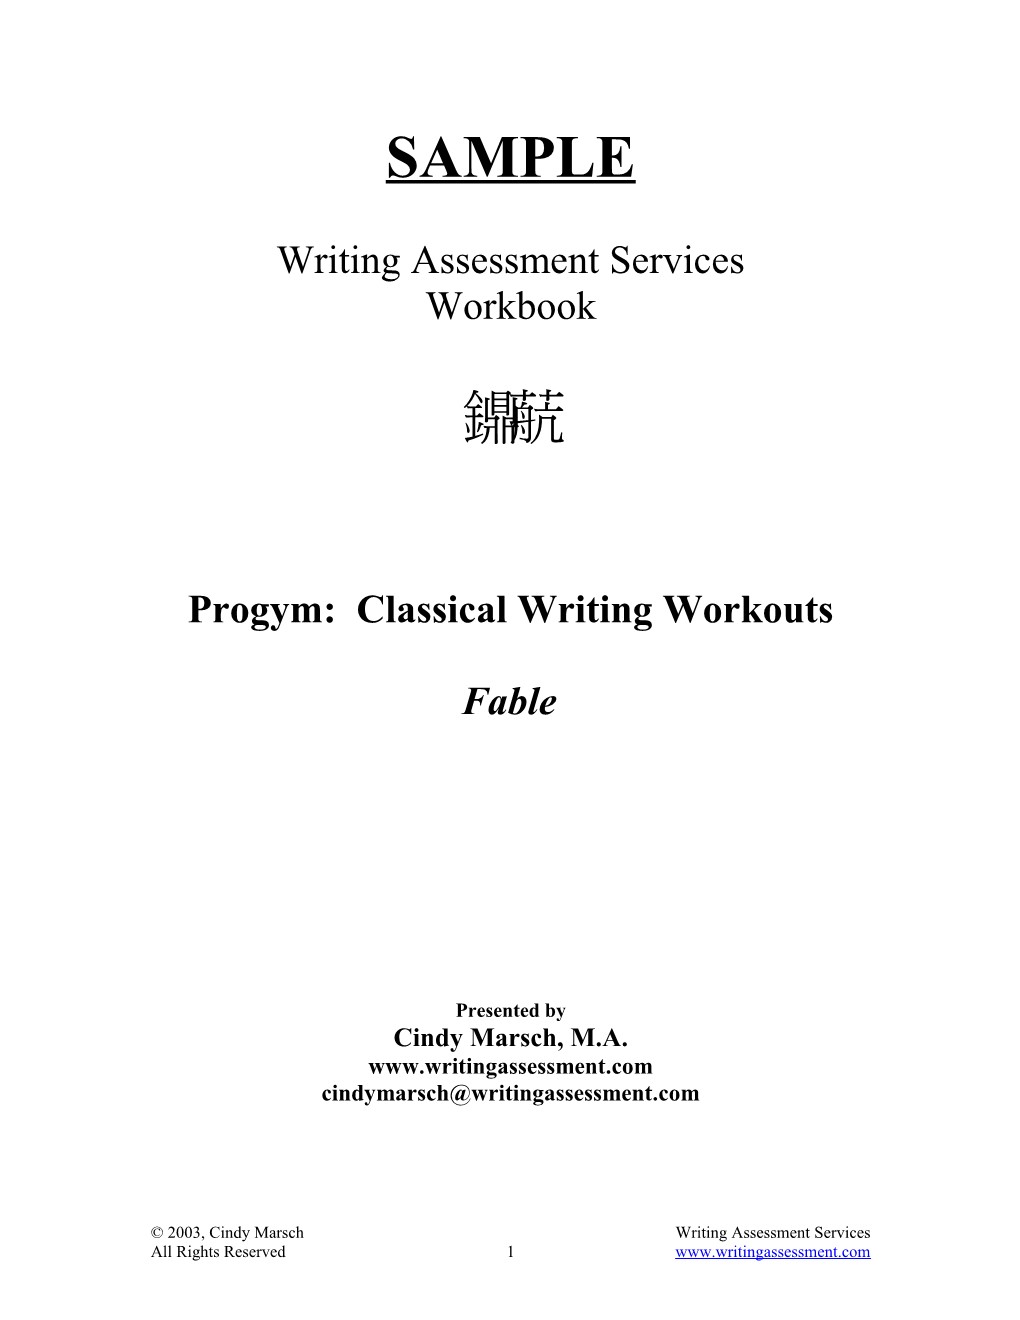 This Sample Is Taken from a 48-Page Original Workbook